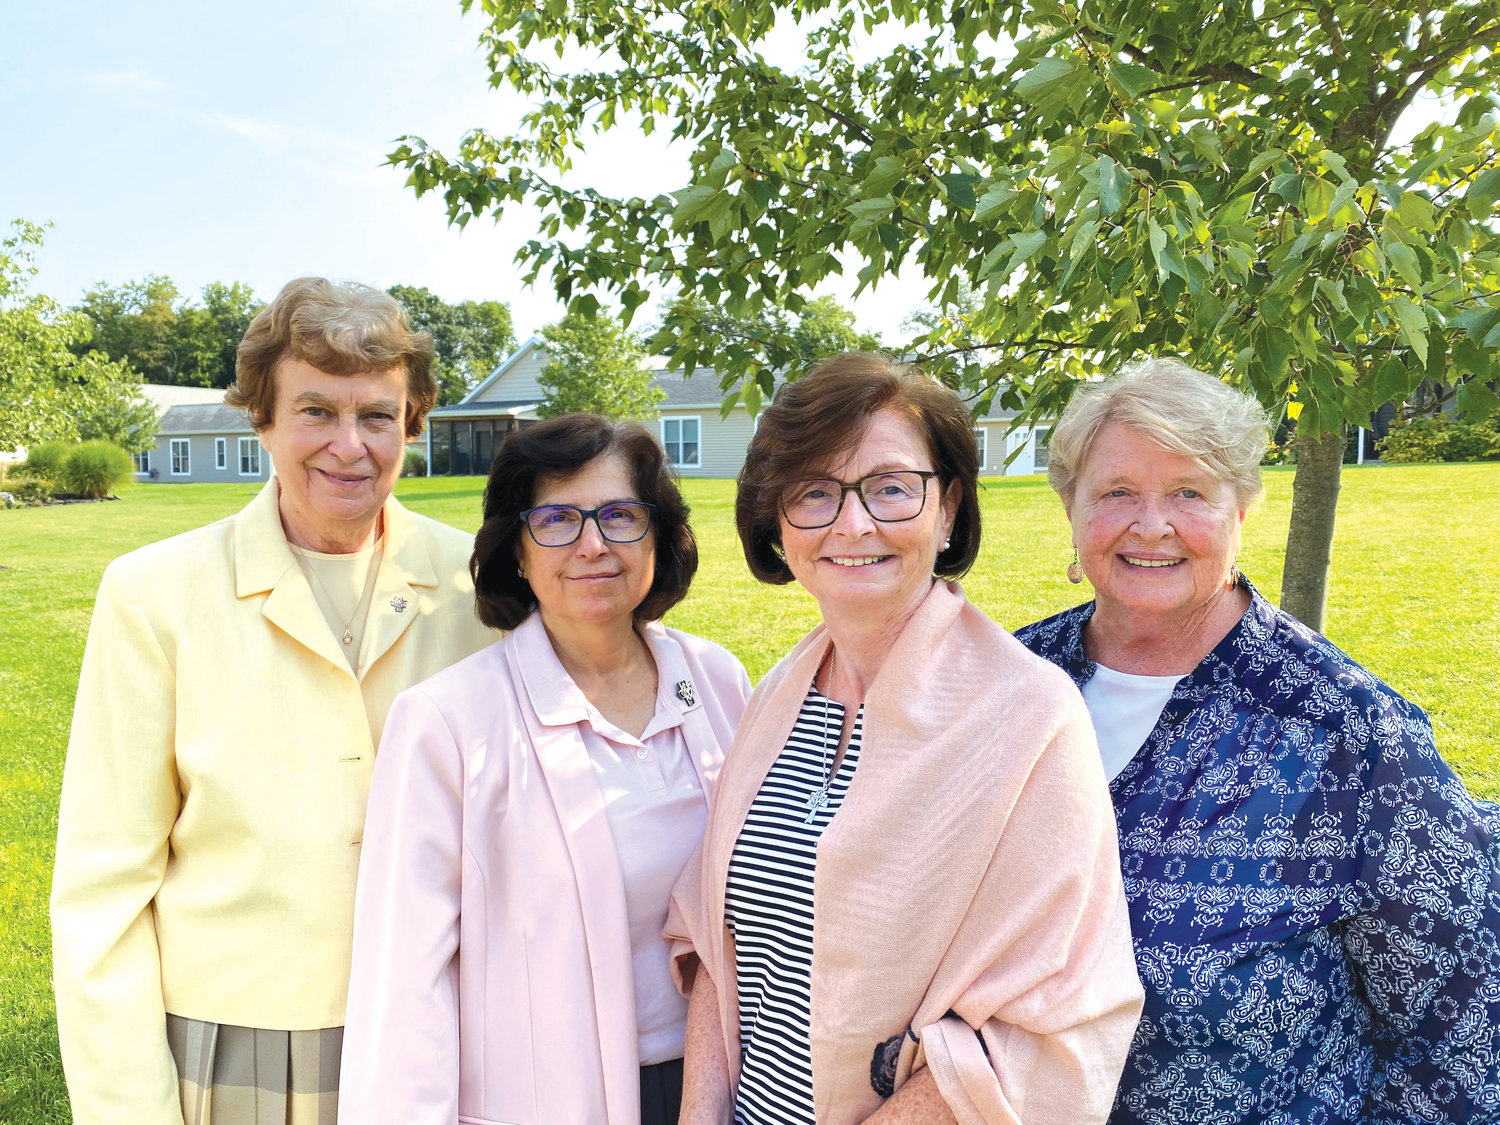 LEADERS—The members of the leadership team of the Presentation Sisters of the Blessed Virgin Mary of New Windsor are, from left, Sister Catherine Cleary, P.B.V.M., vice president; Sister Laura Urbano, P.B.V.M., councilor; Sister Mary Catherine Redmond, P.B.V.M., president, and Sister Dorothy Scesny, P.B.V.M., councilor.